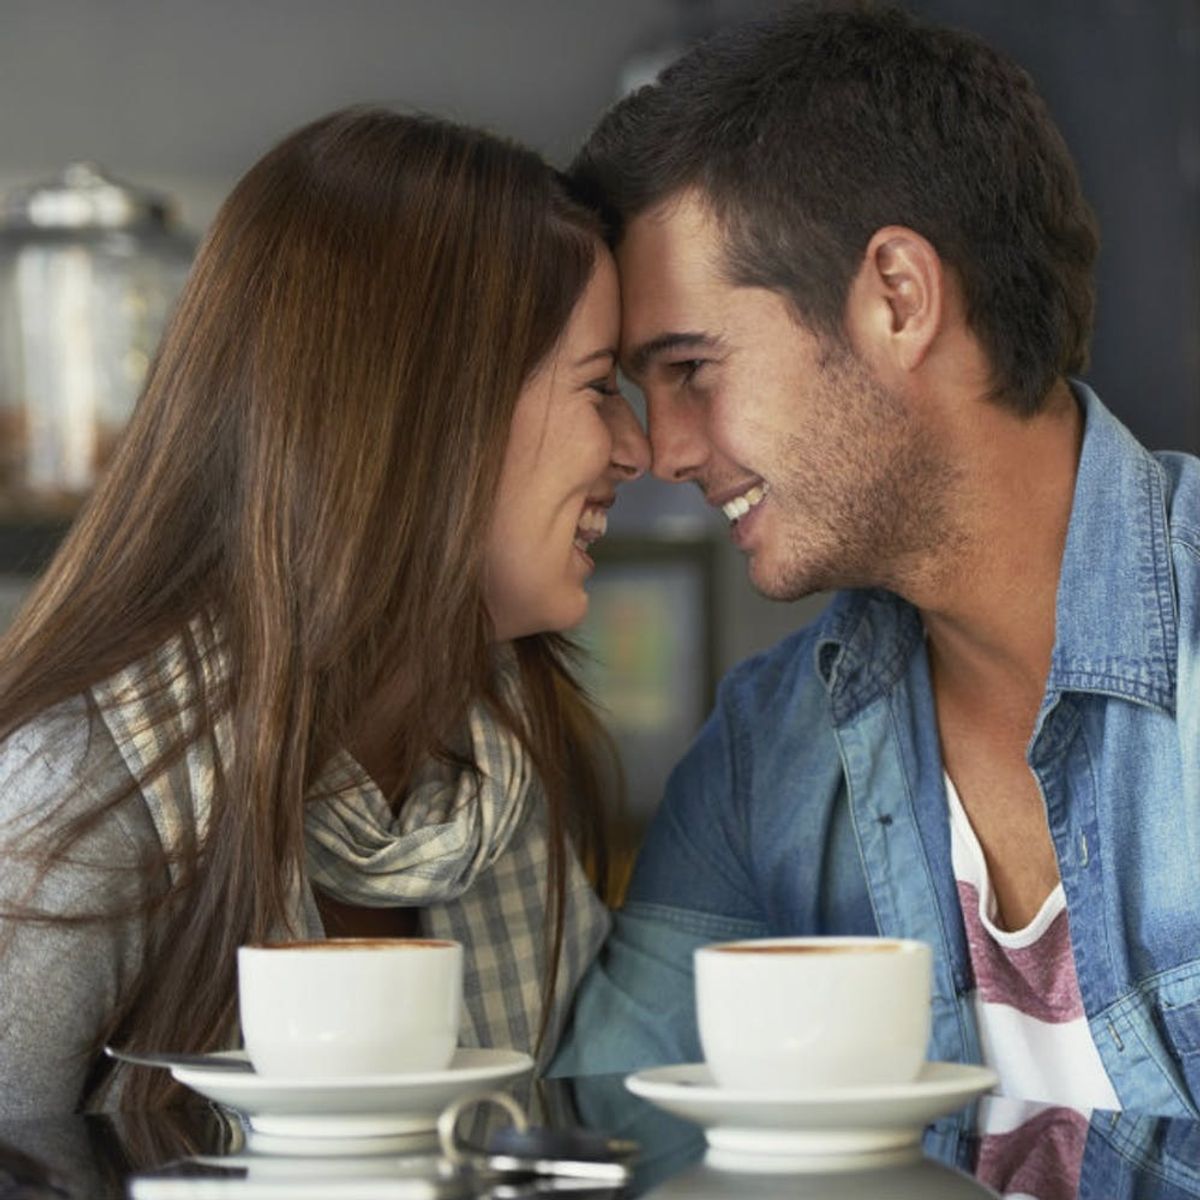 Why “Opposites Attract” Is Only True if You’re Single